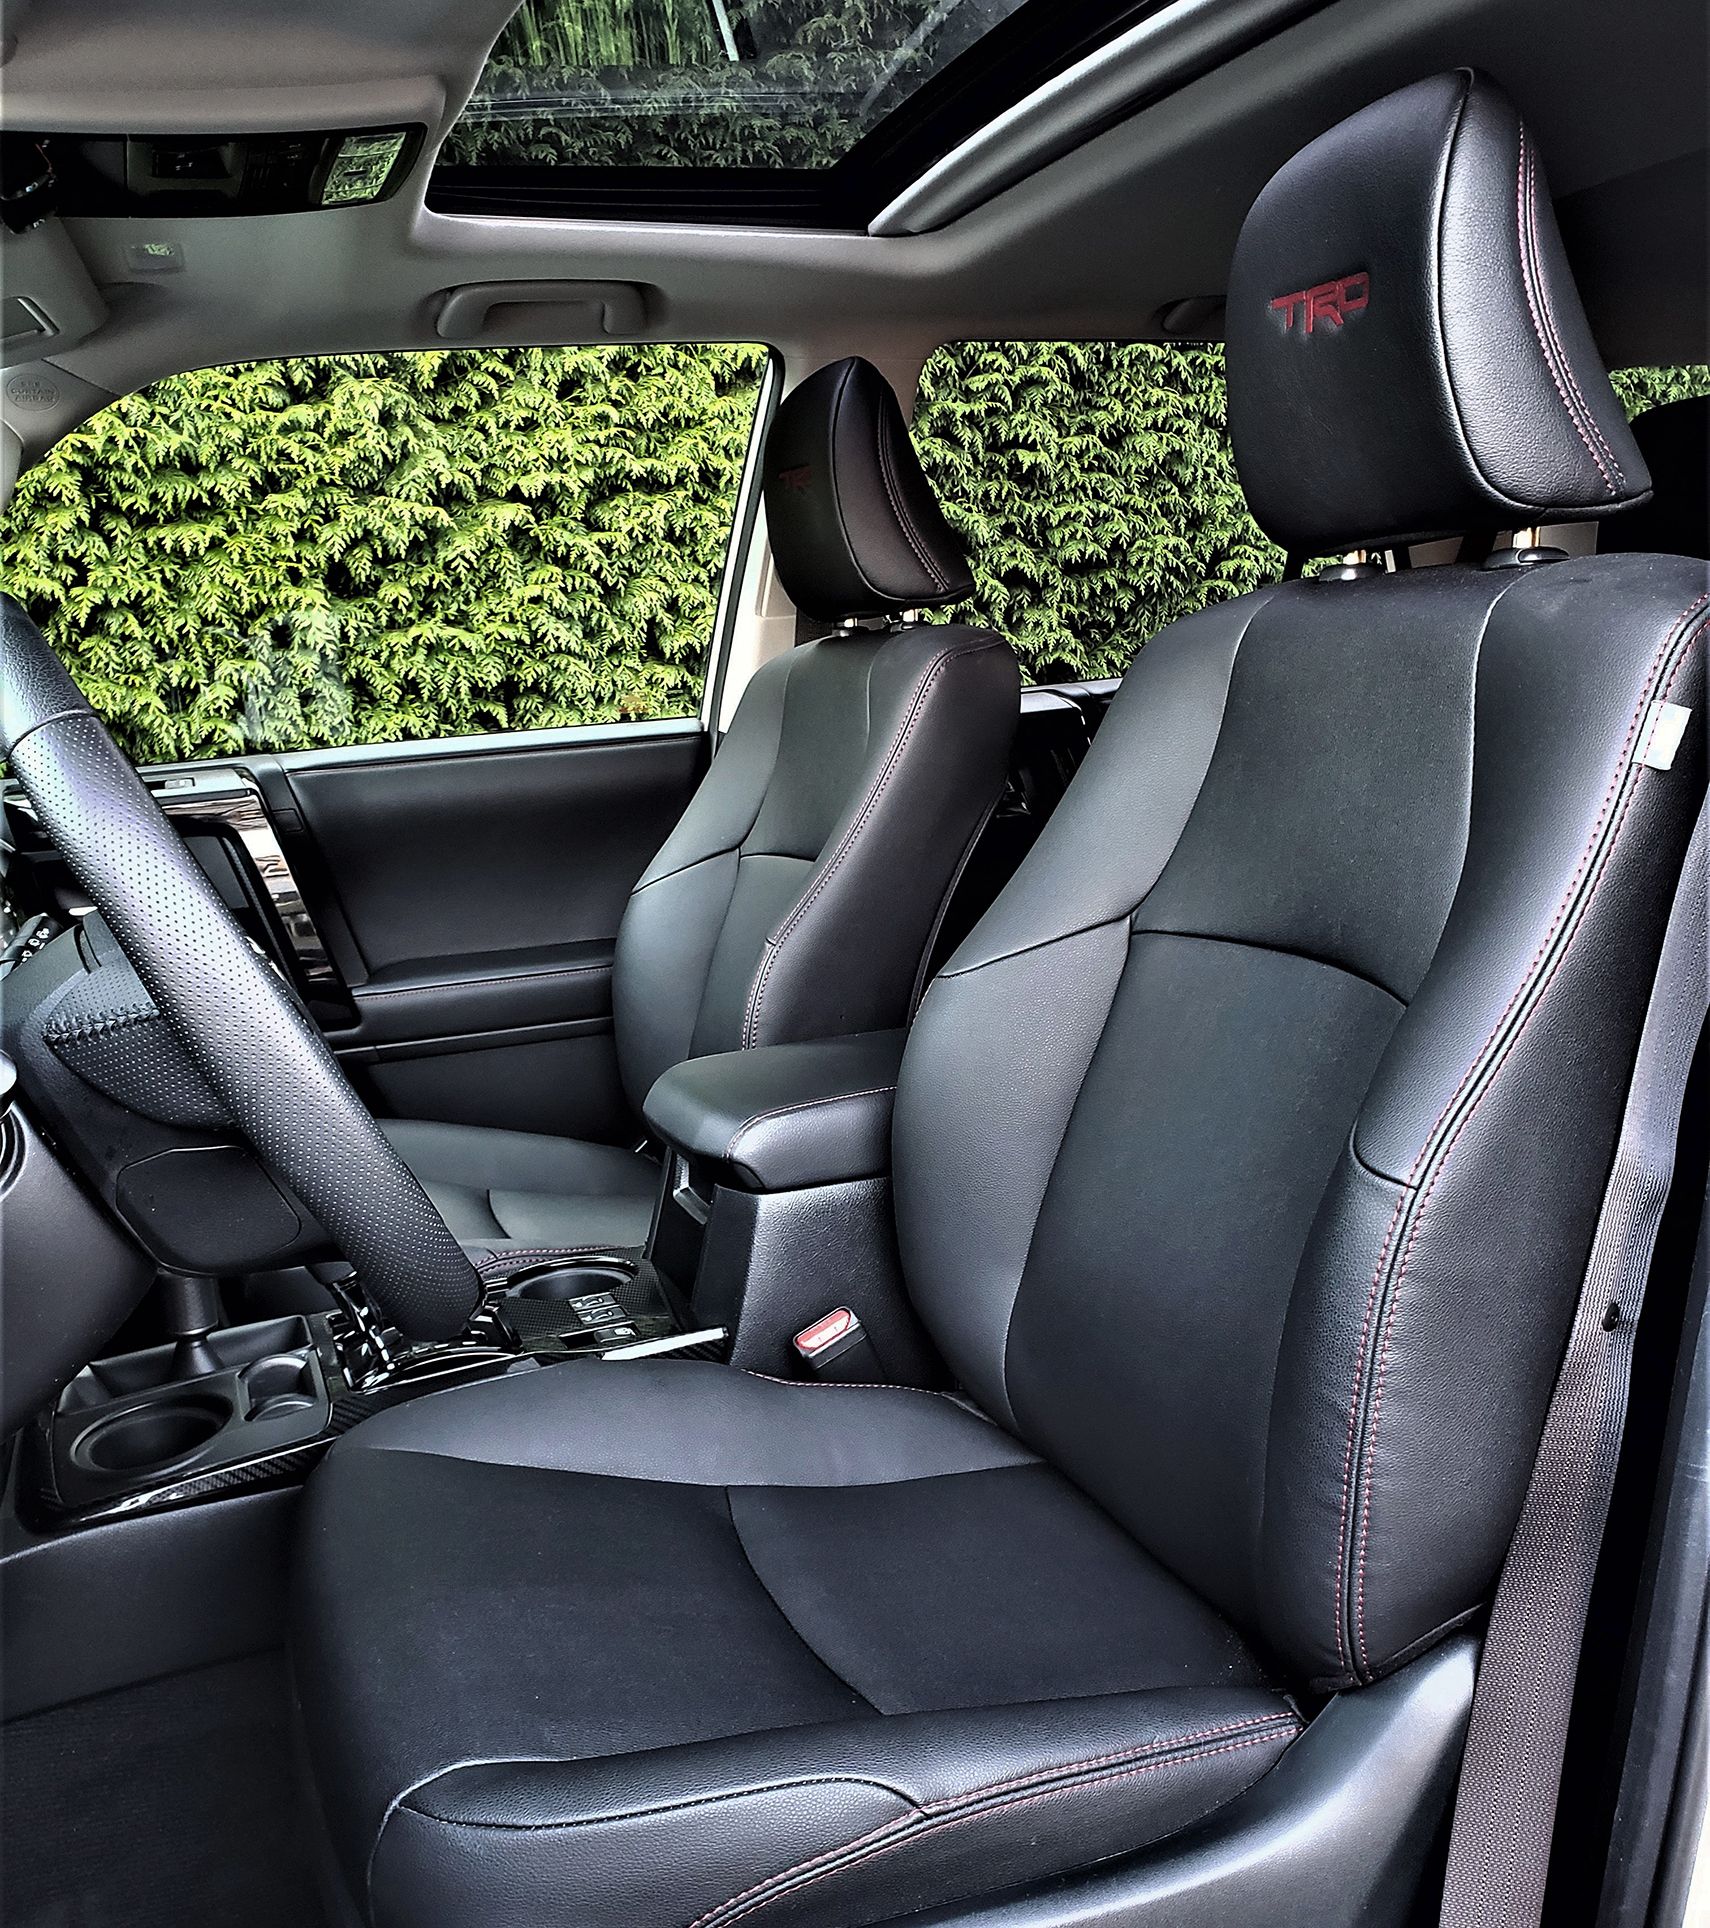 The 2020 Toyota 4Runner Venture Edition's driver's seat is very comfortable and supportive.